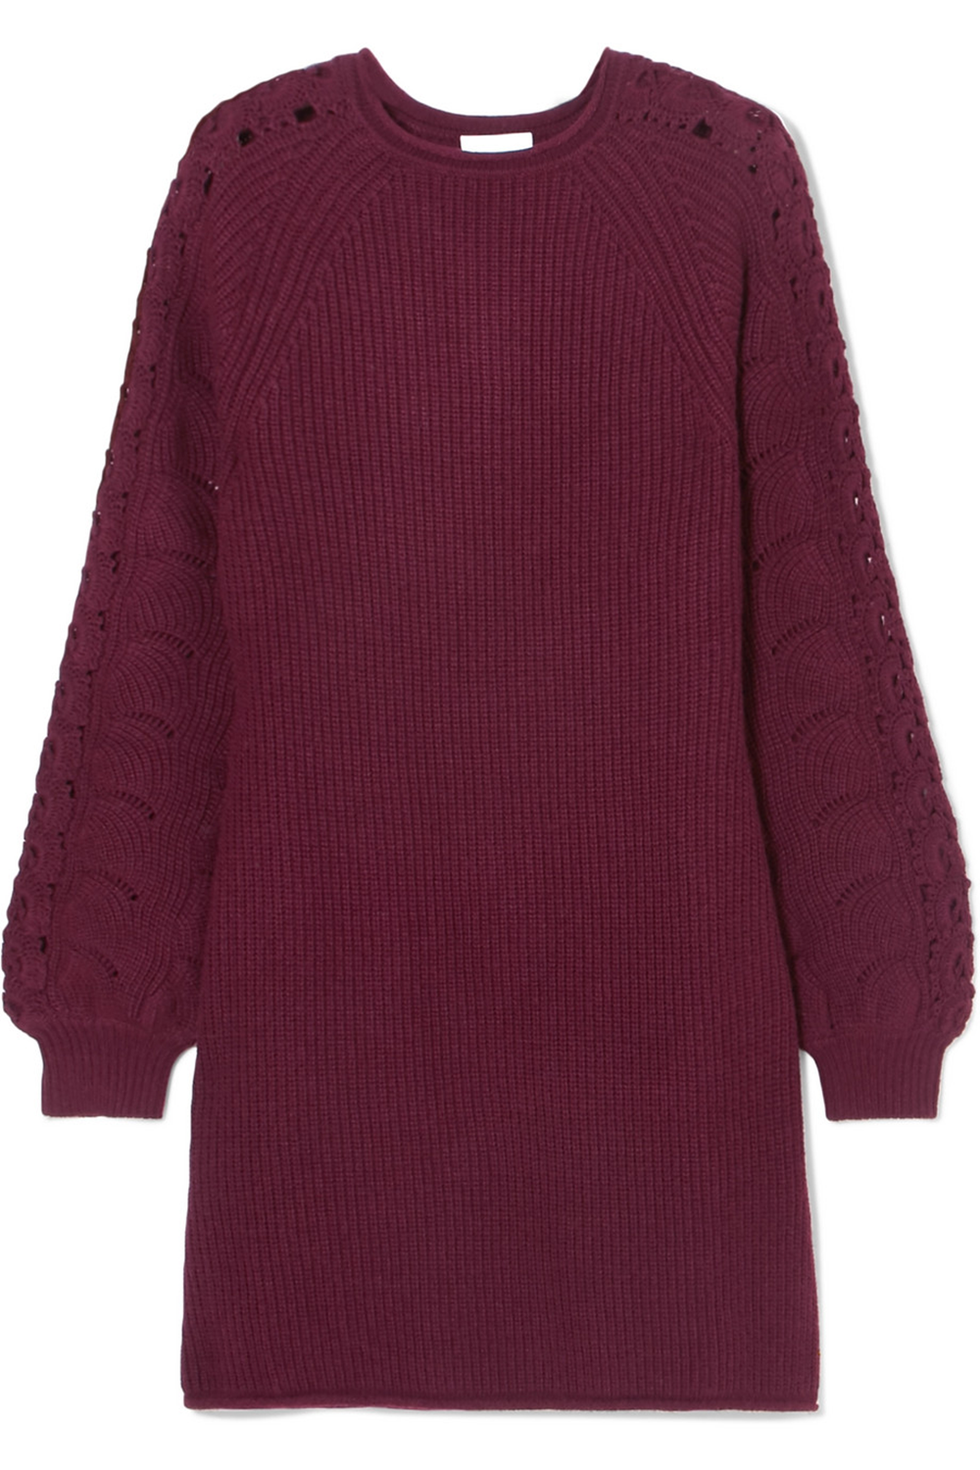 Clothing, Sleeve, Maroon, Red, Outerwear, Violet, Purple, Jersey, Magenta, Sweater, 